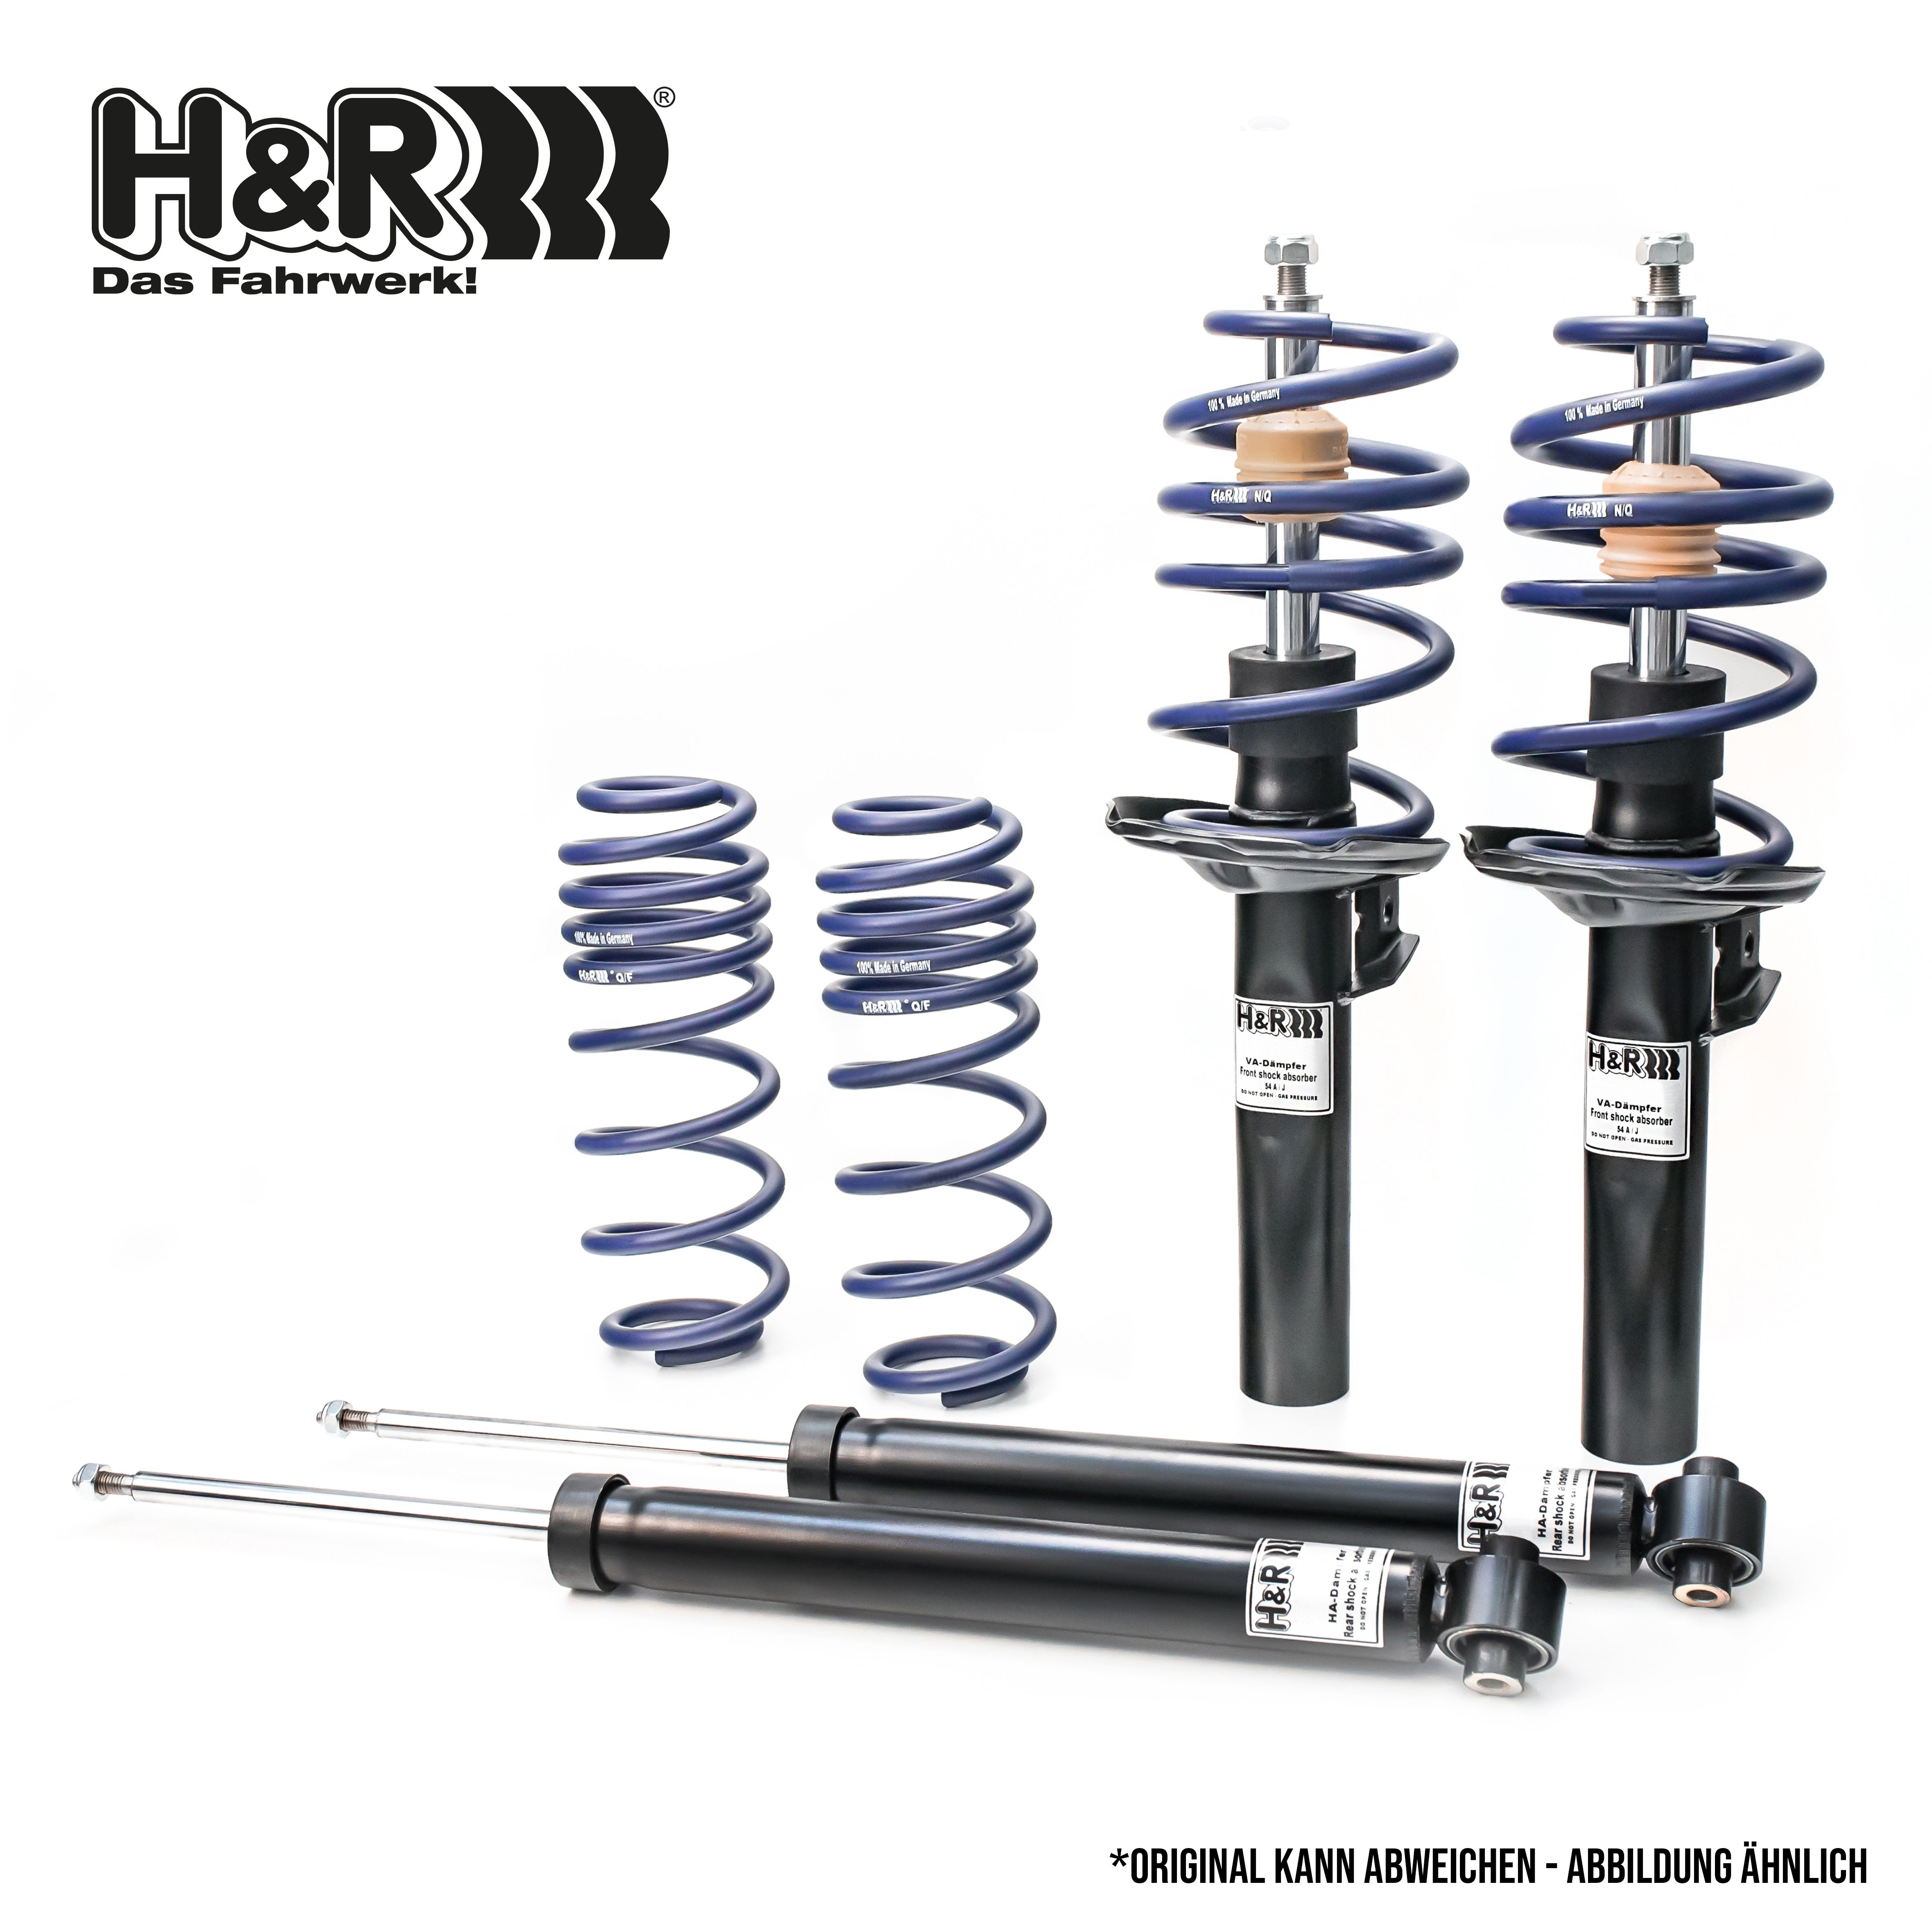 H&R 40926-2 MERCEDES-BENZ Suspension kit, coil springs / shock absorbers in original quality